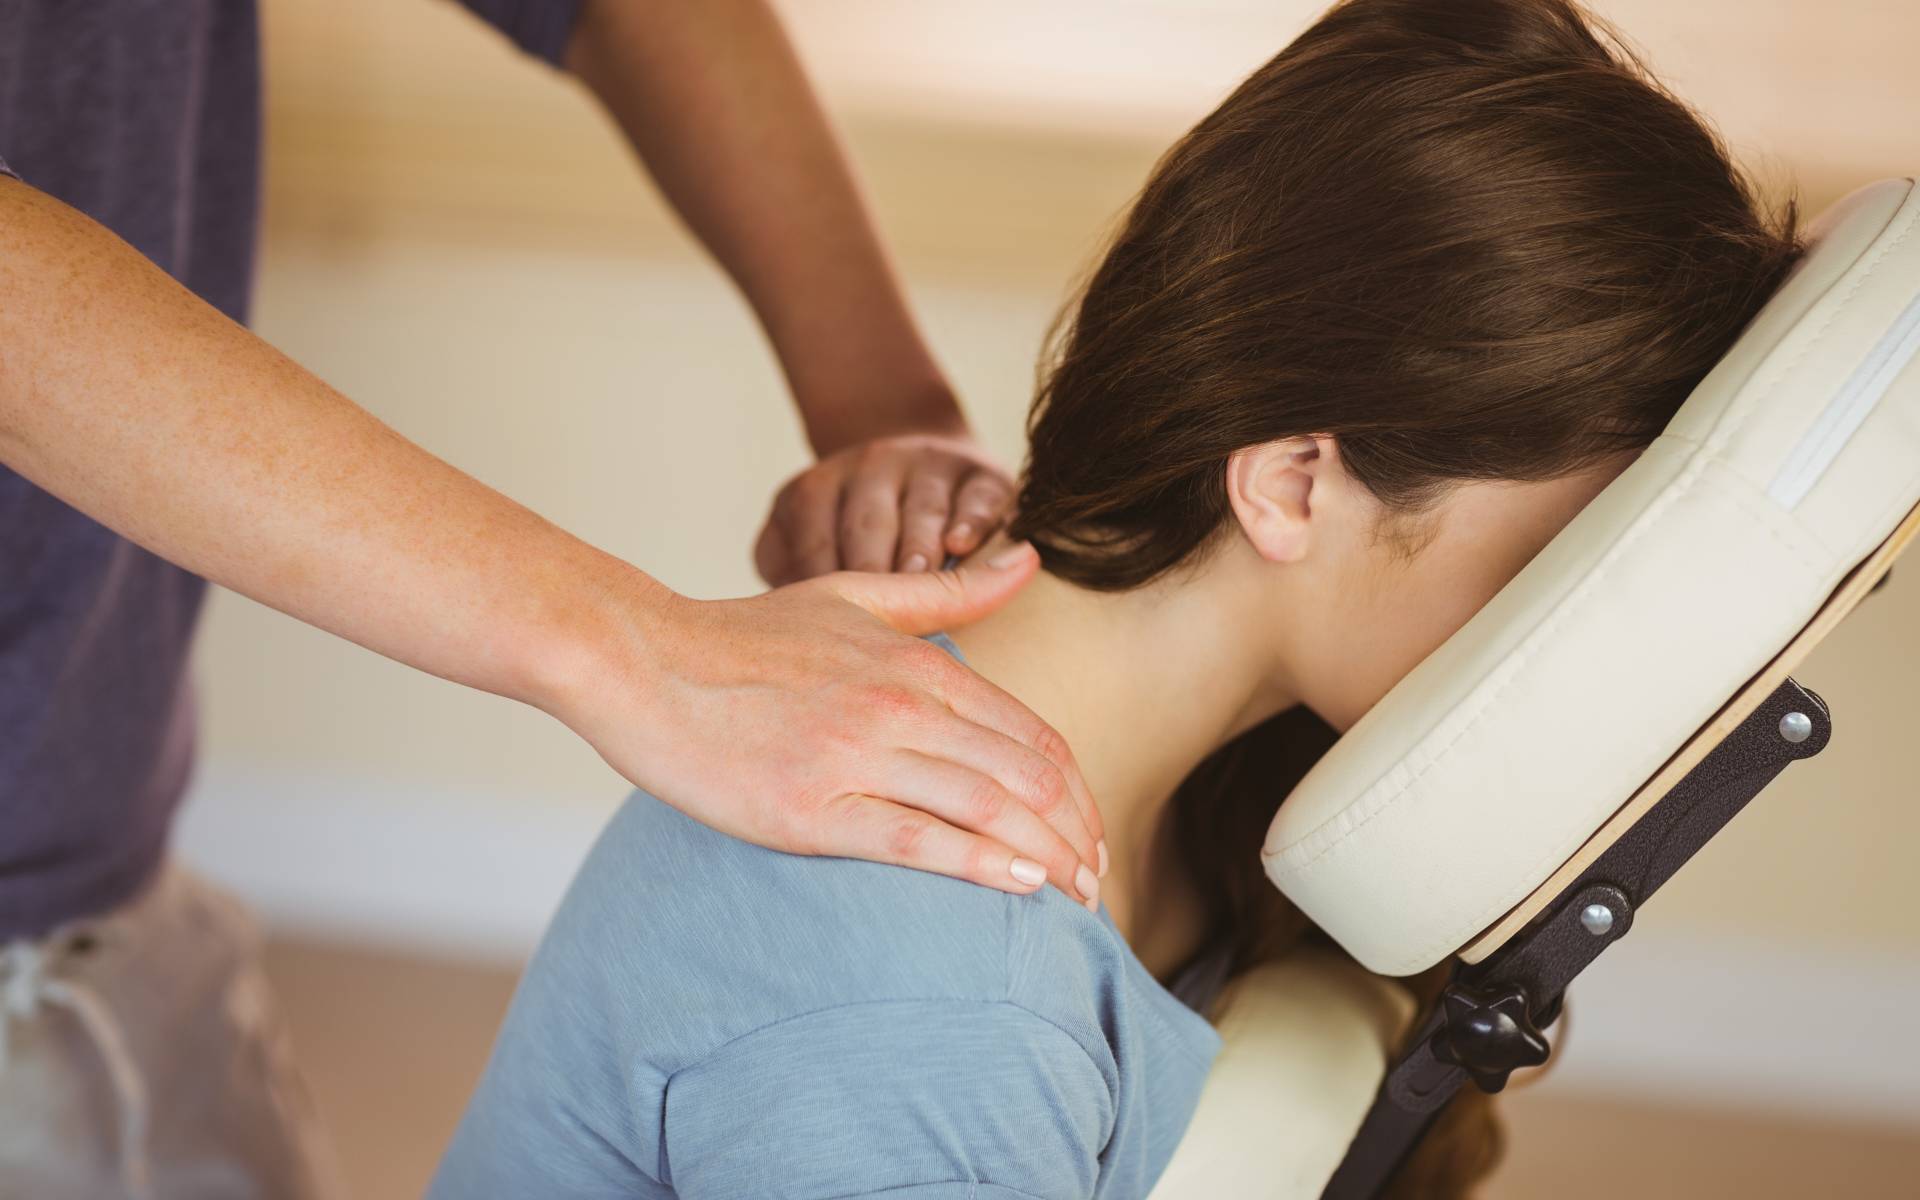 An image of a woman who is sitting down while getting her back massaged.